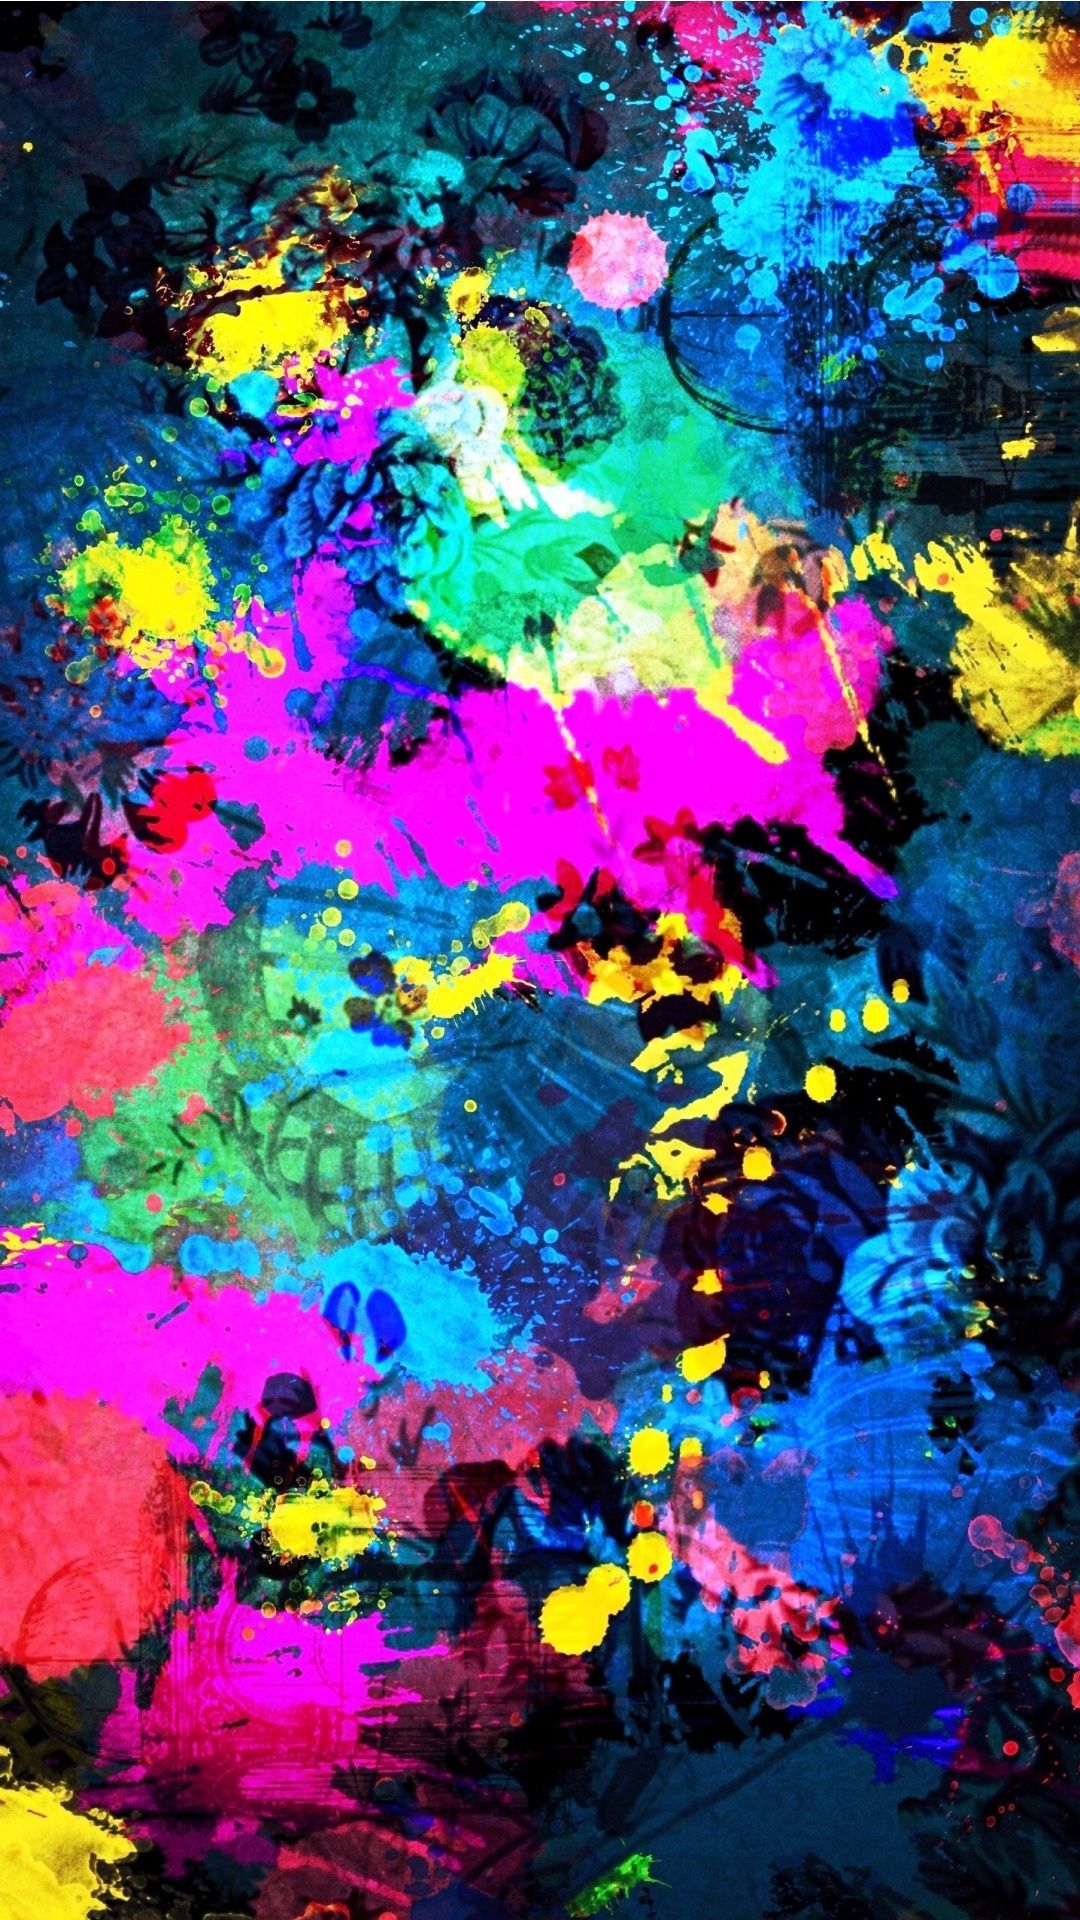 Aggregate 71+ colorful iphone wallpaper latest - in.cdgdbentre